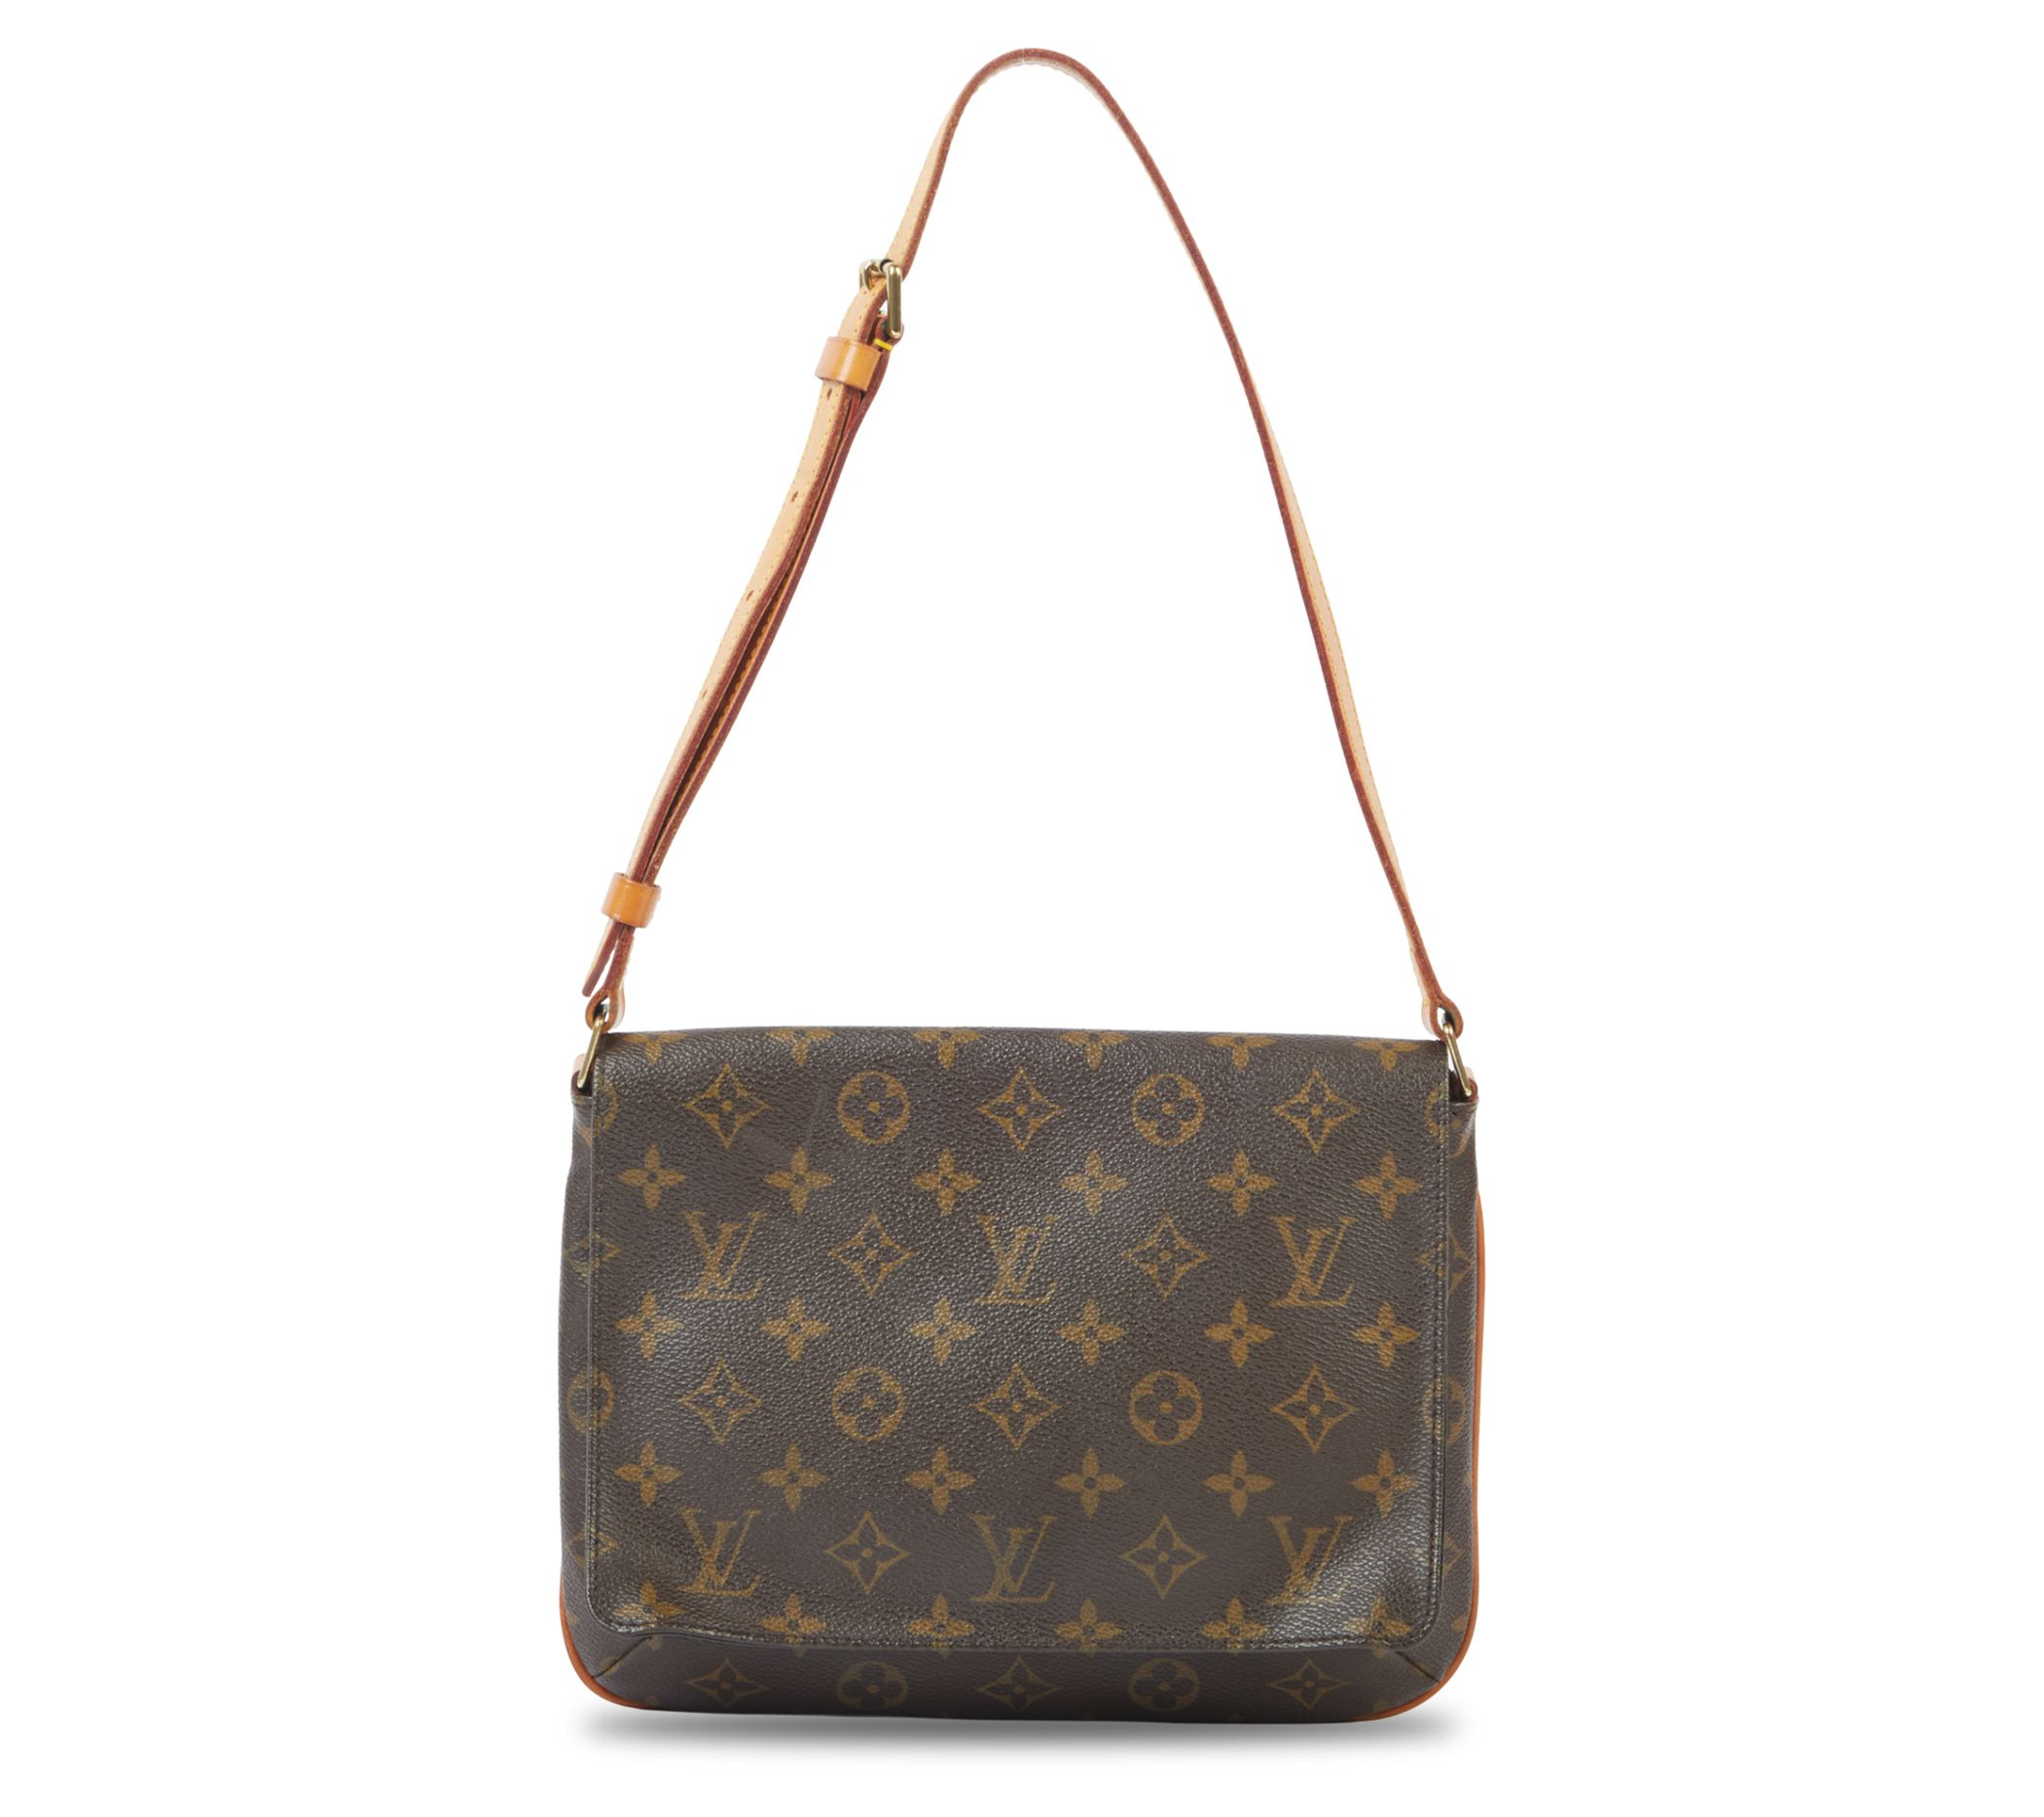 Pics Of Your Louis Vuitton With Chains/Straps/Extenders!!!